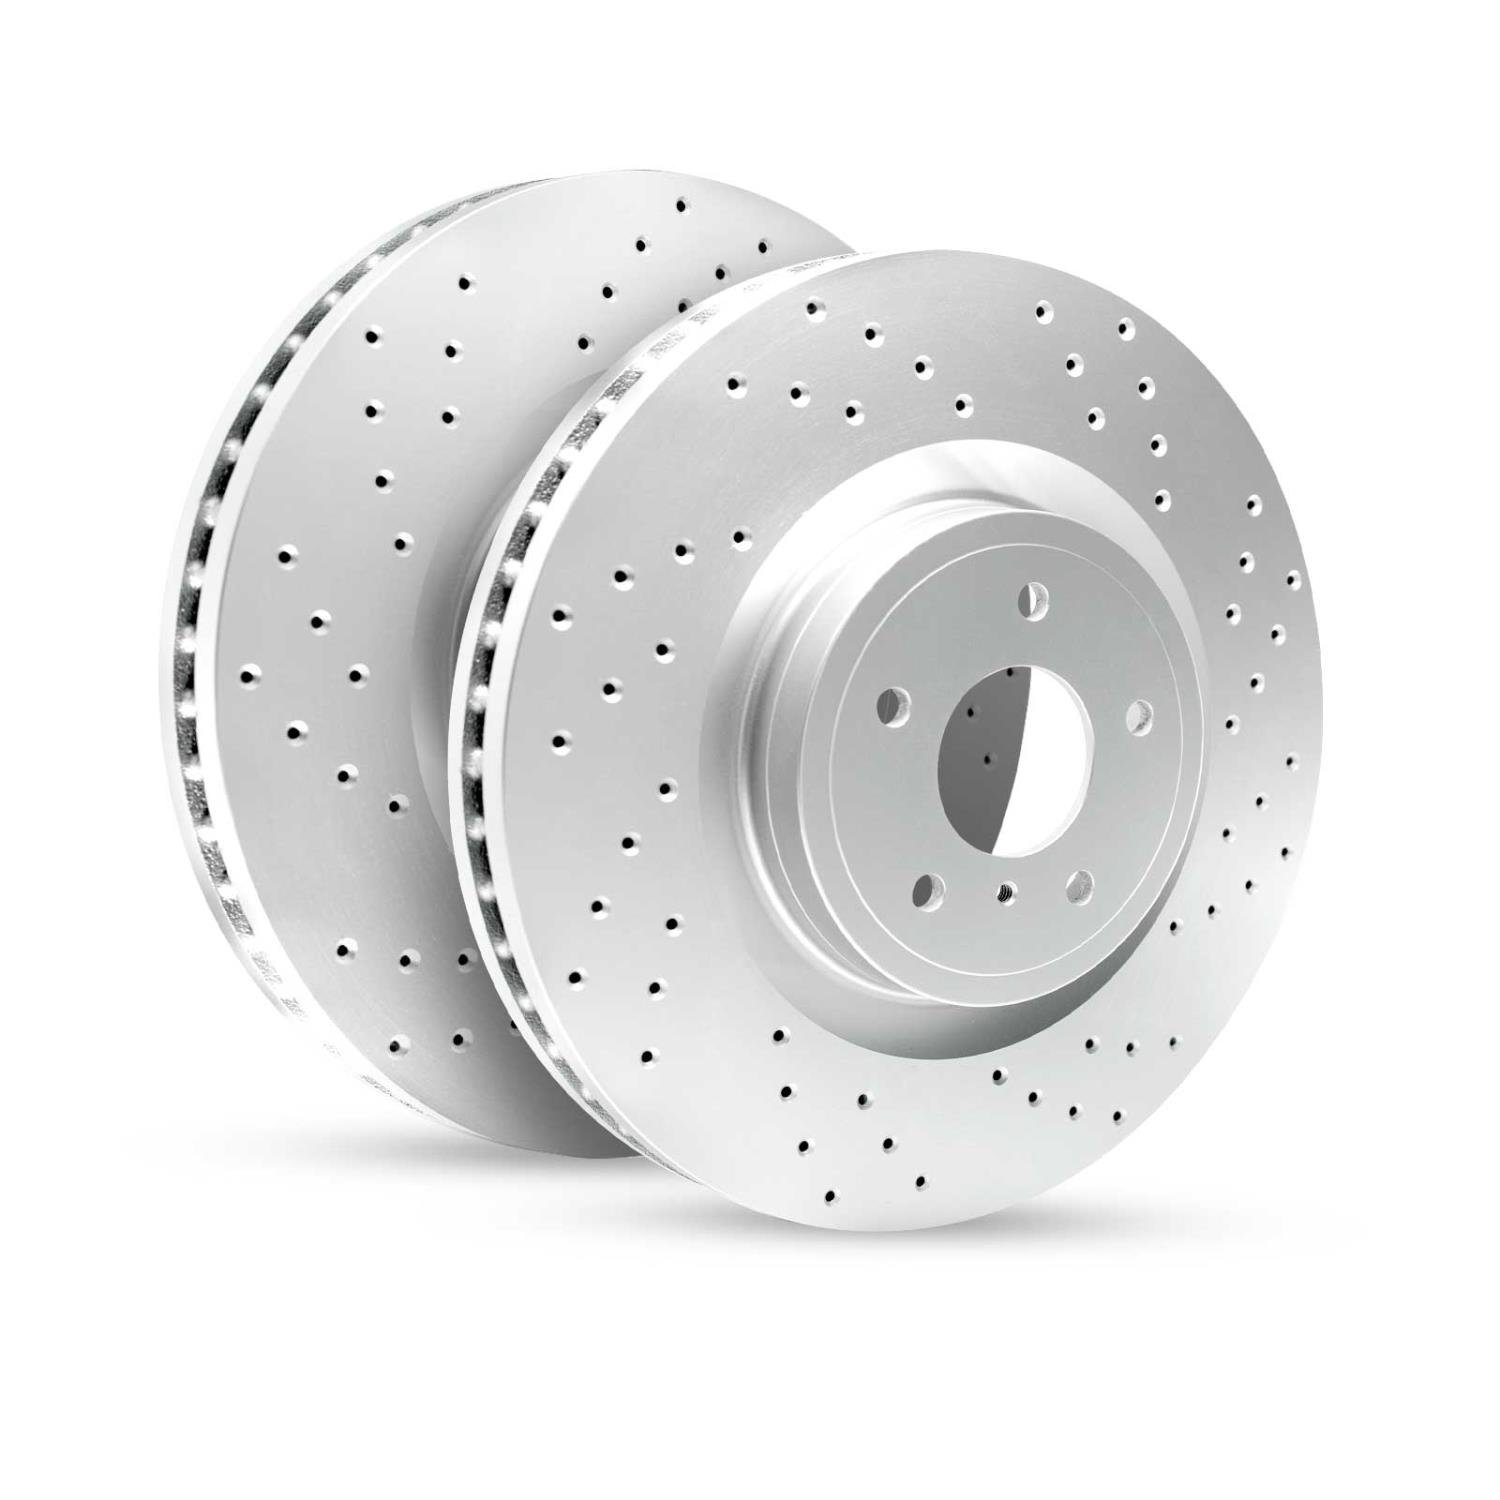 GEO-Carbon Drilled/Slotted Rotors, 2007-2017 Fits Multiple